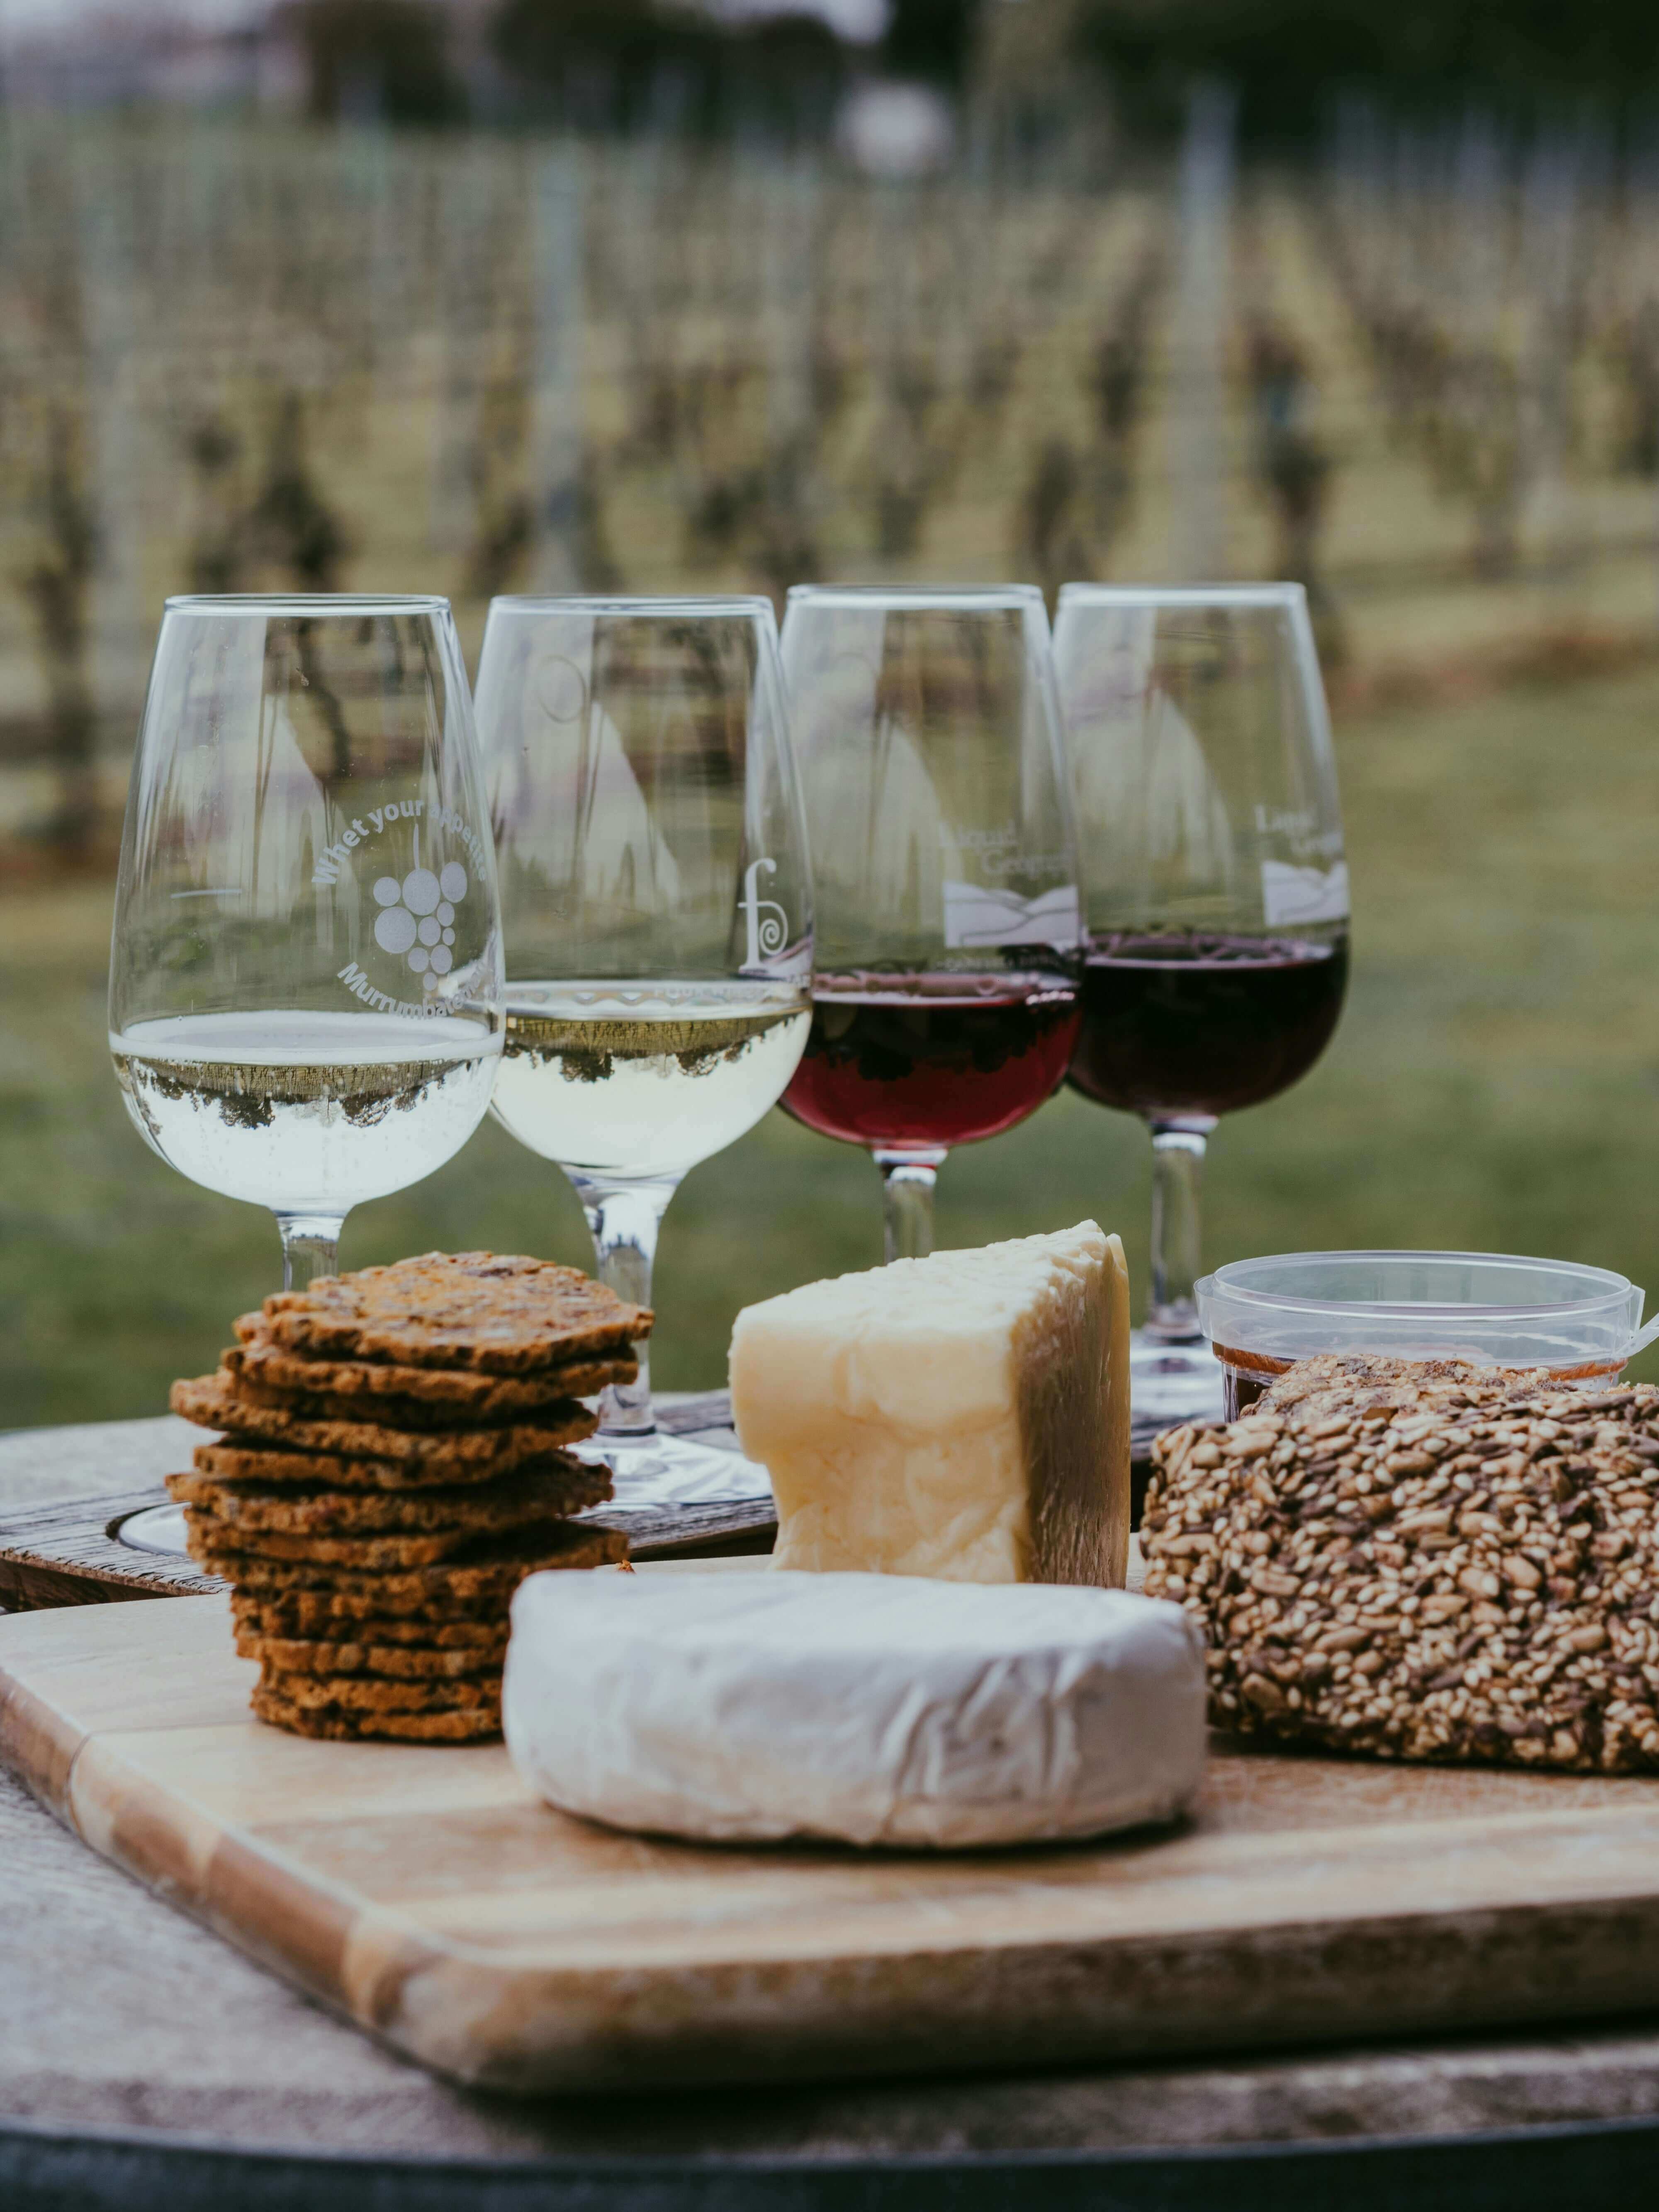 Let's Meet Wine & Cheese Dating: Sip, Savour, Connect